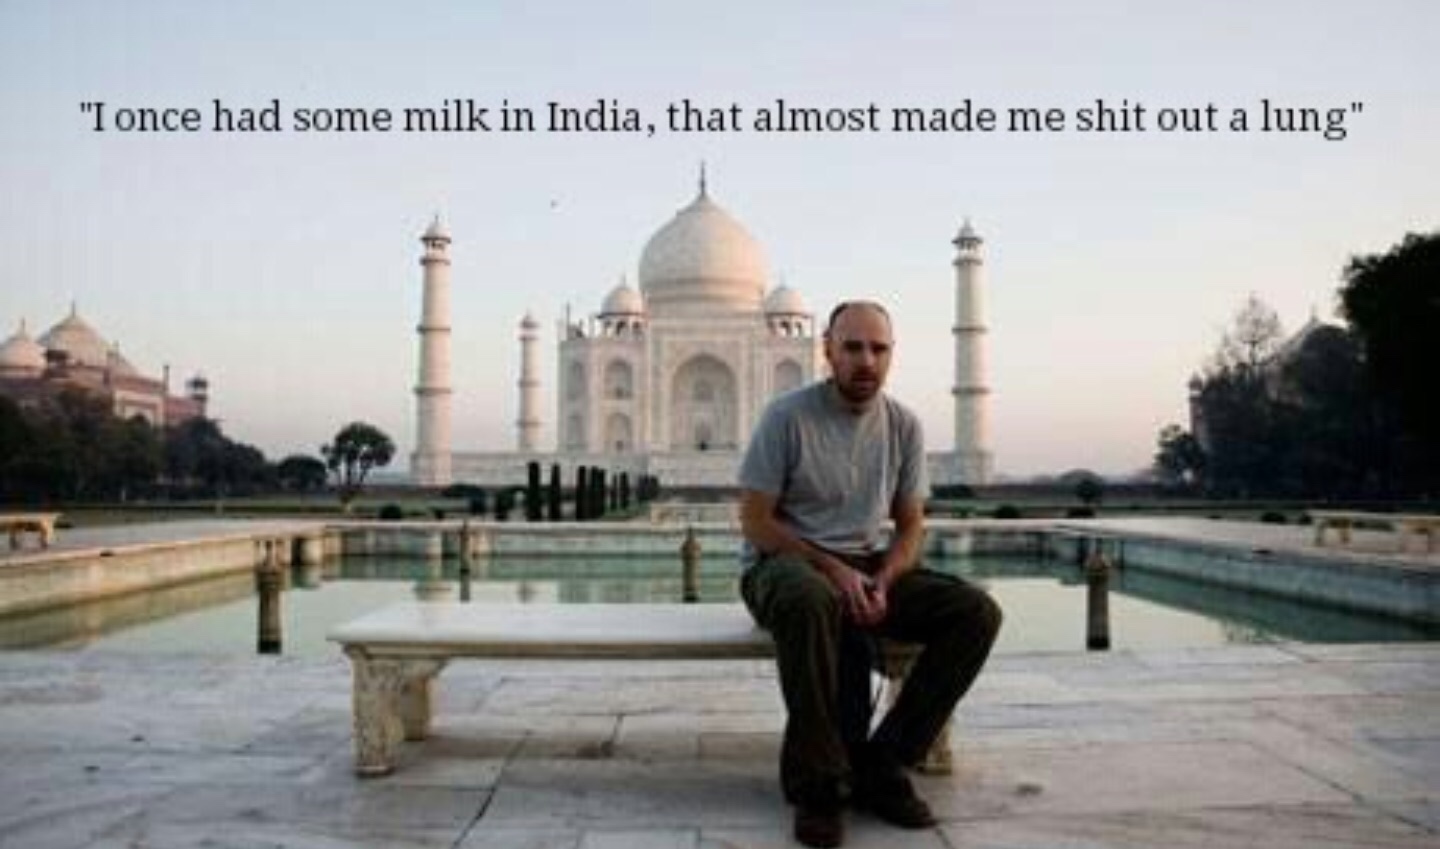 showerthoughts   - taj mahal - "I once had some milk in India, that almost made me shit out a lung"